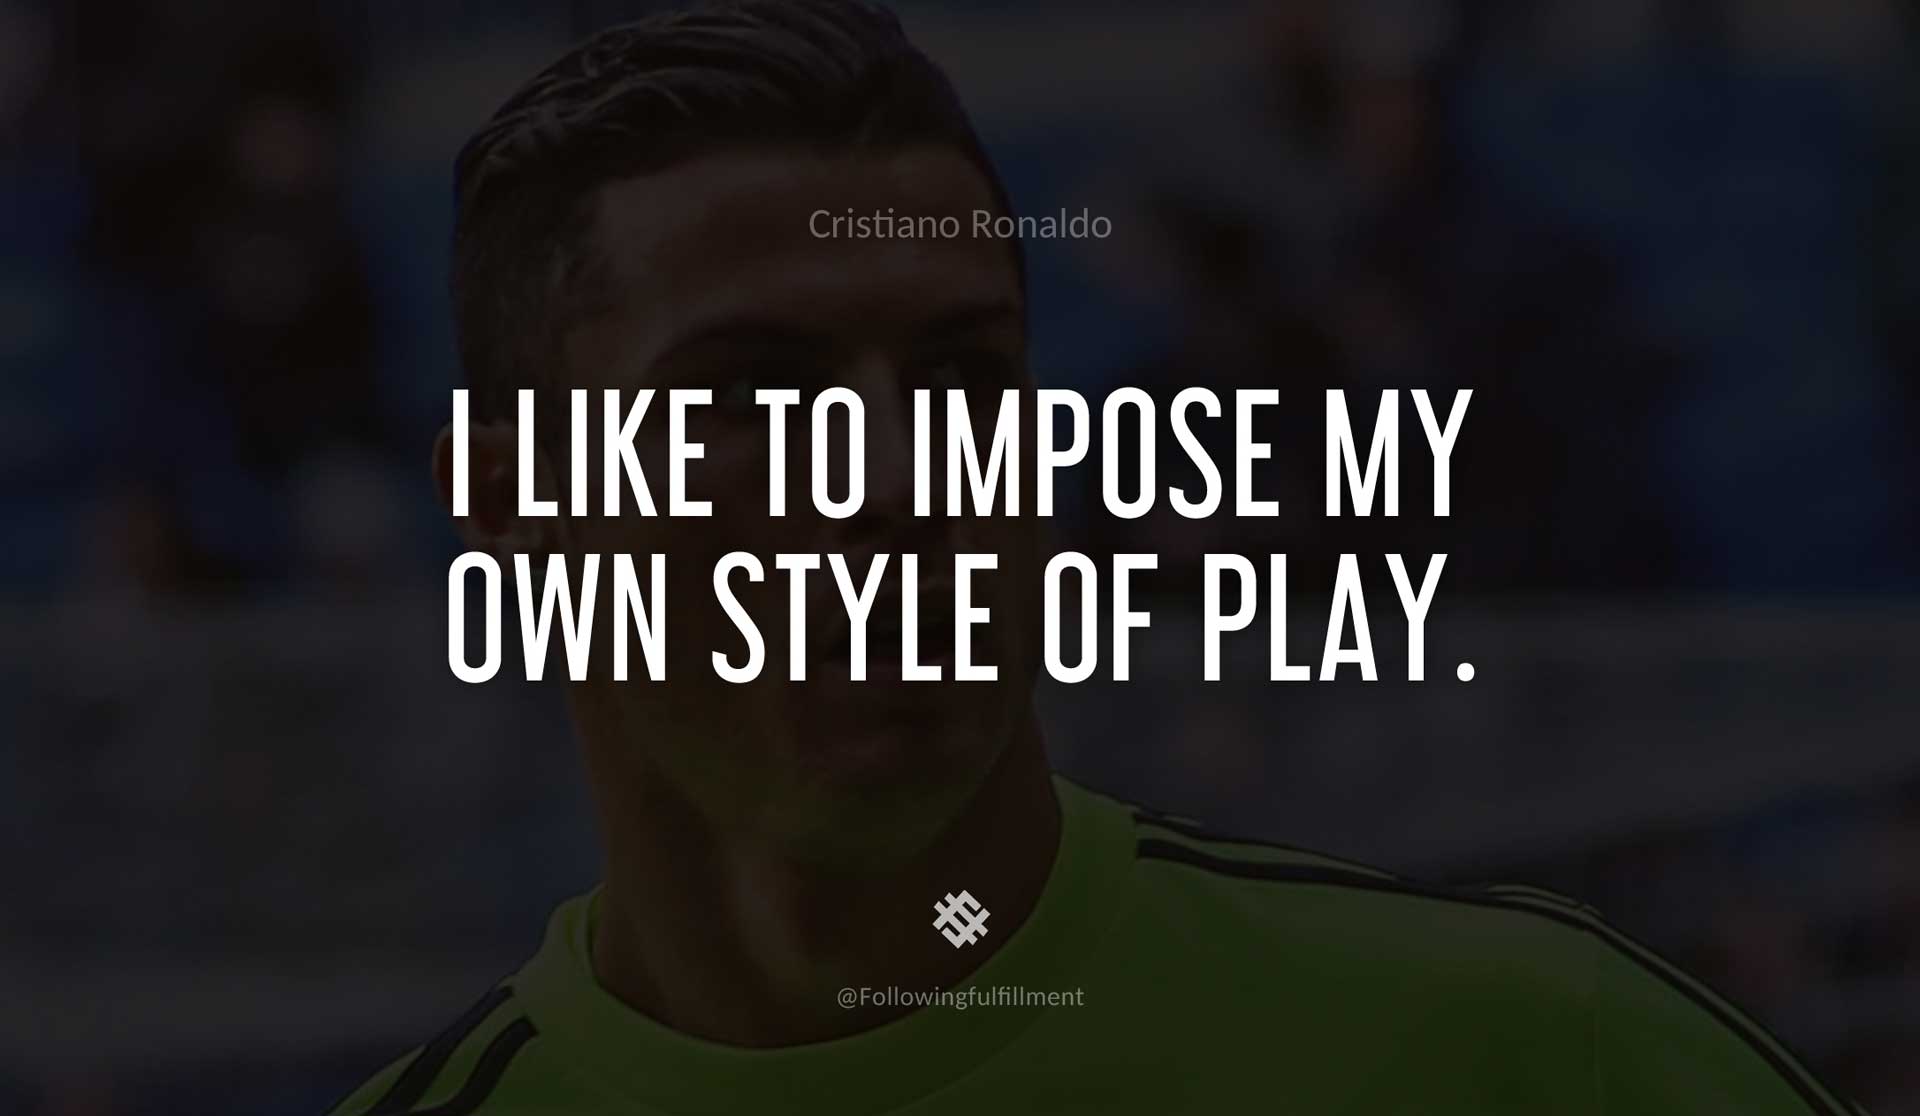 I-like-to-impose-my-own-style-of-play.-CRISTIANO-RONALDO-Quote.jpg